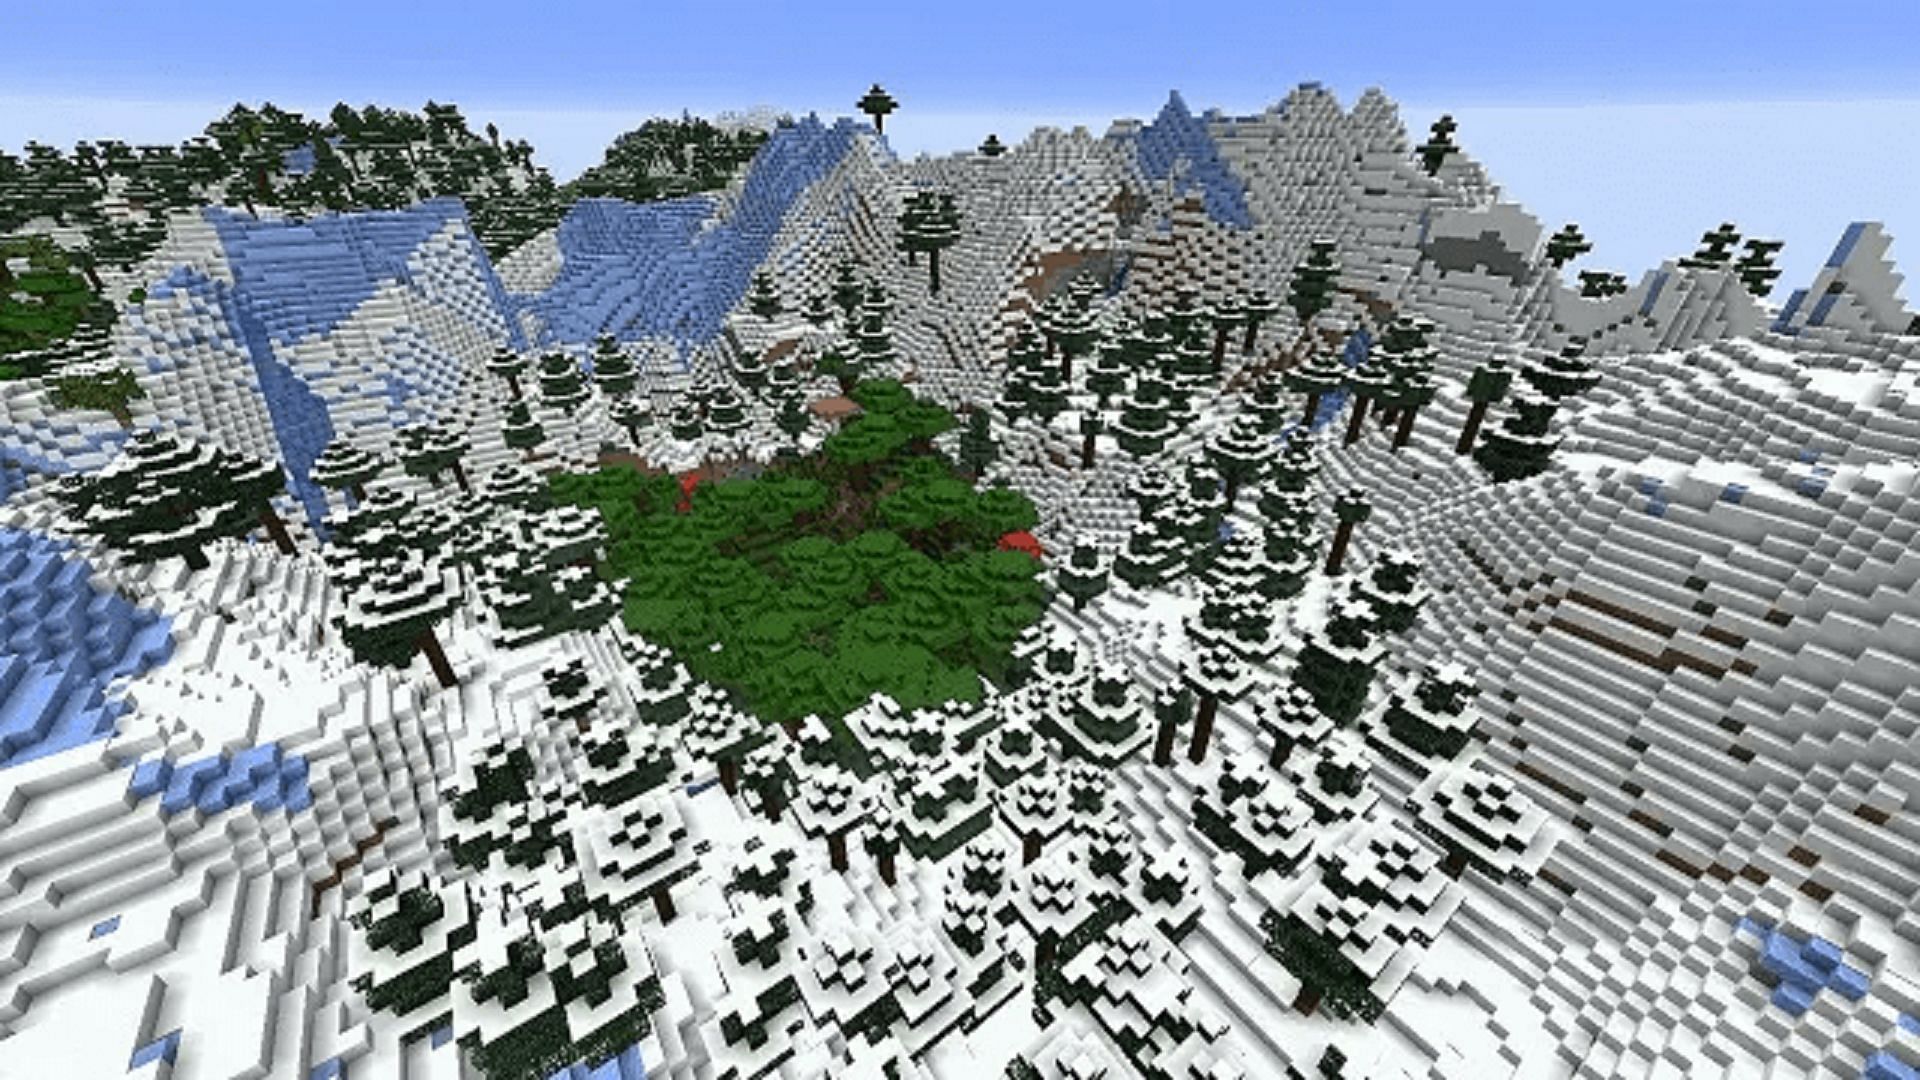 This mountain exhibits a great crater for a building site (Image via Mojang)